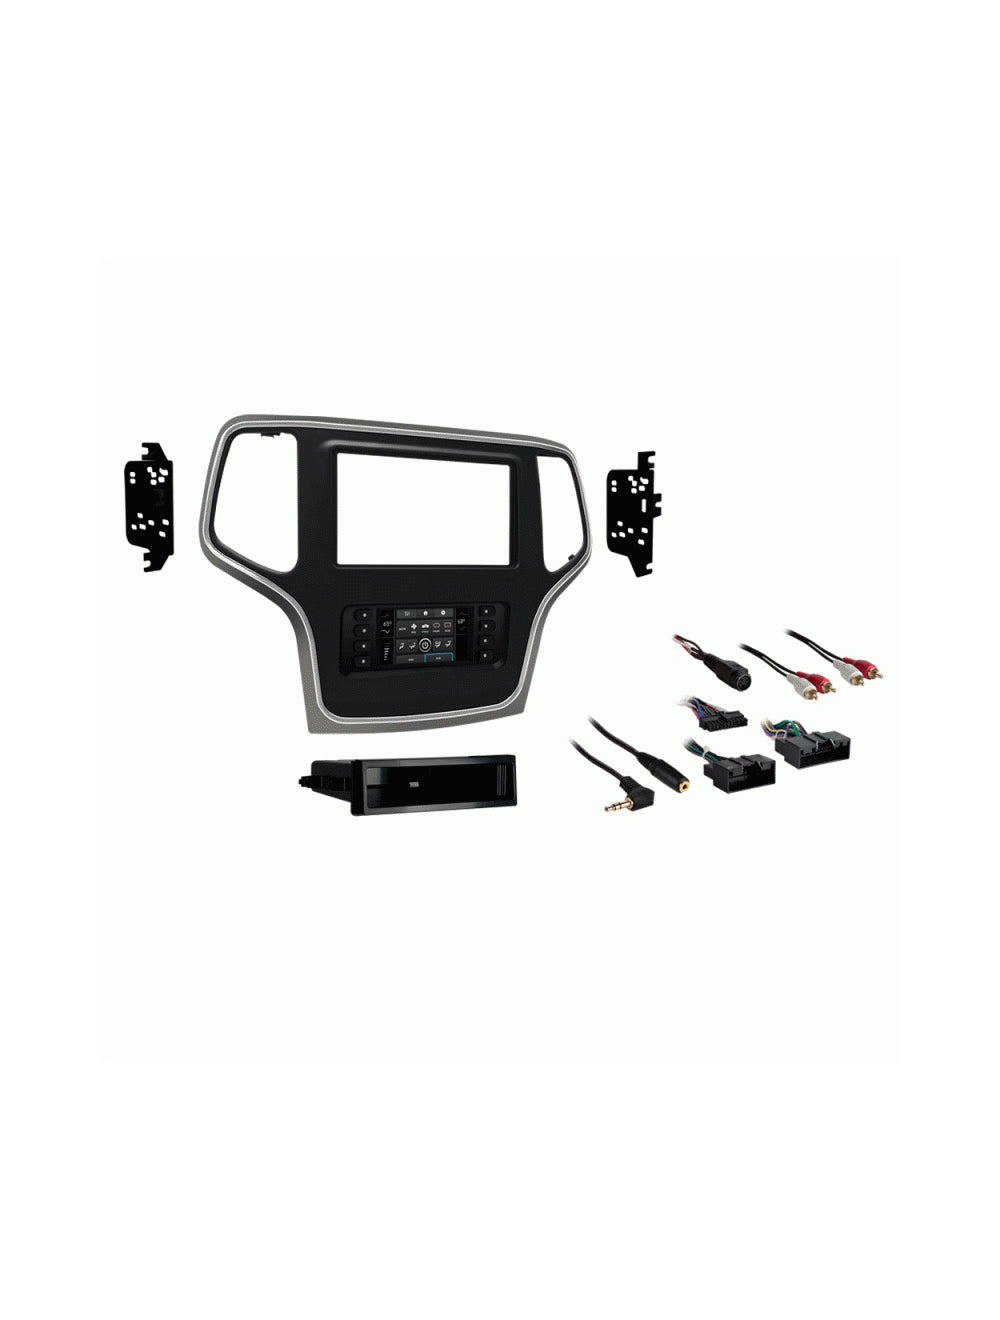 Metra 99-6536S Turbo Touch Premium Dash Kit with Integrated Touch Screen for 2014-Up Jeep Grand Cherokee